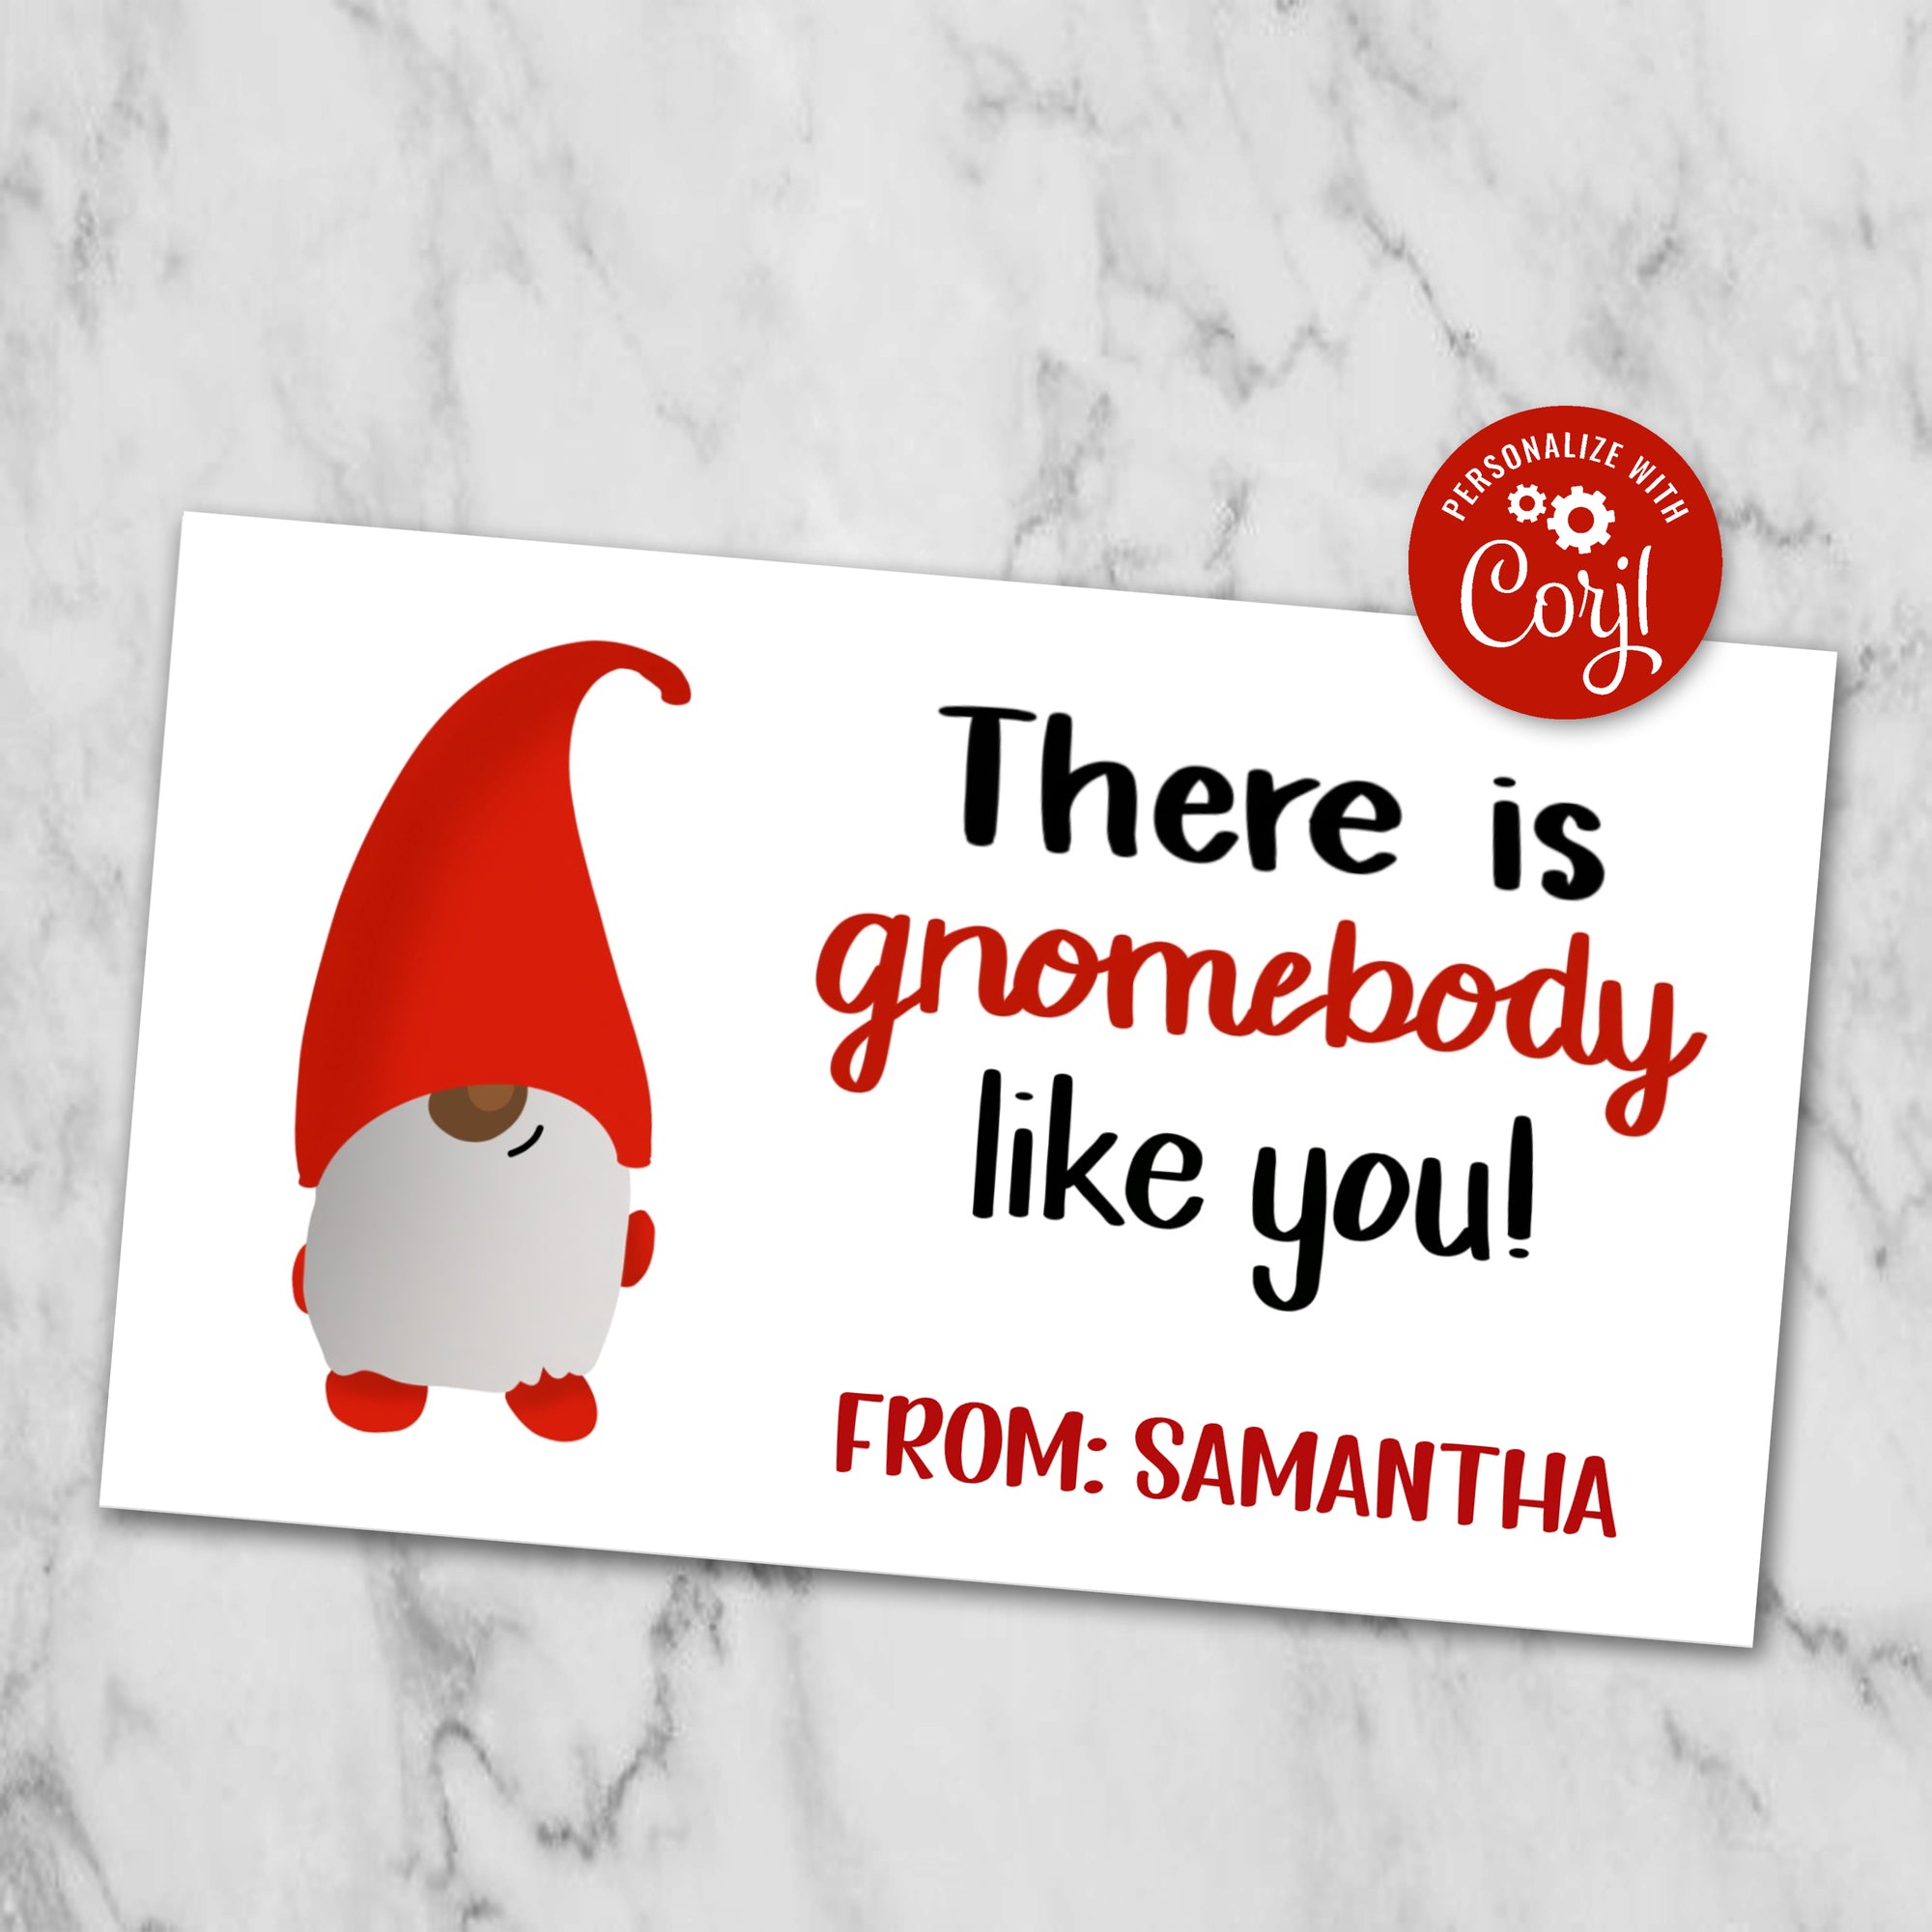 Gnome Cards for Valentine's Day - African American Gnome Cards - POC Gifts for Valentines Day - There is Gnomebody Like You Gifts - Personalized Gnome Cards - Editable Gnome Cards for School Classroom Party